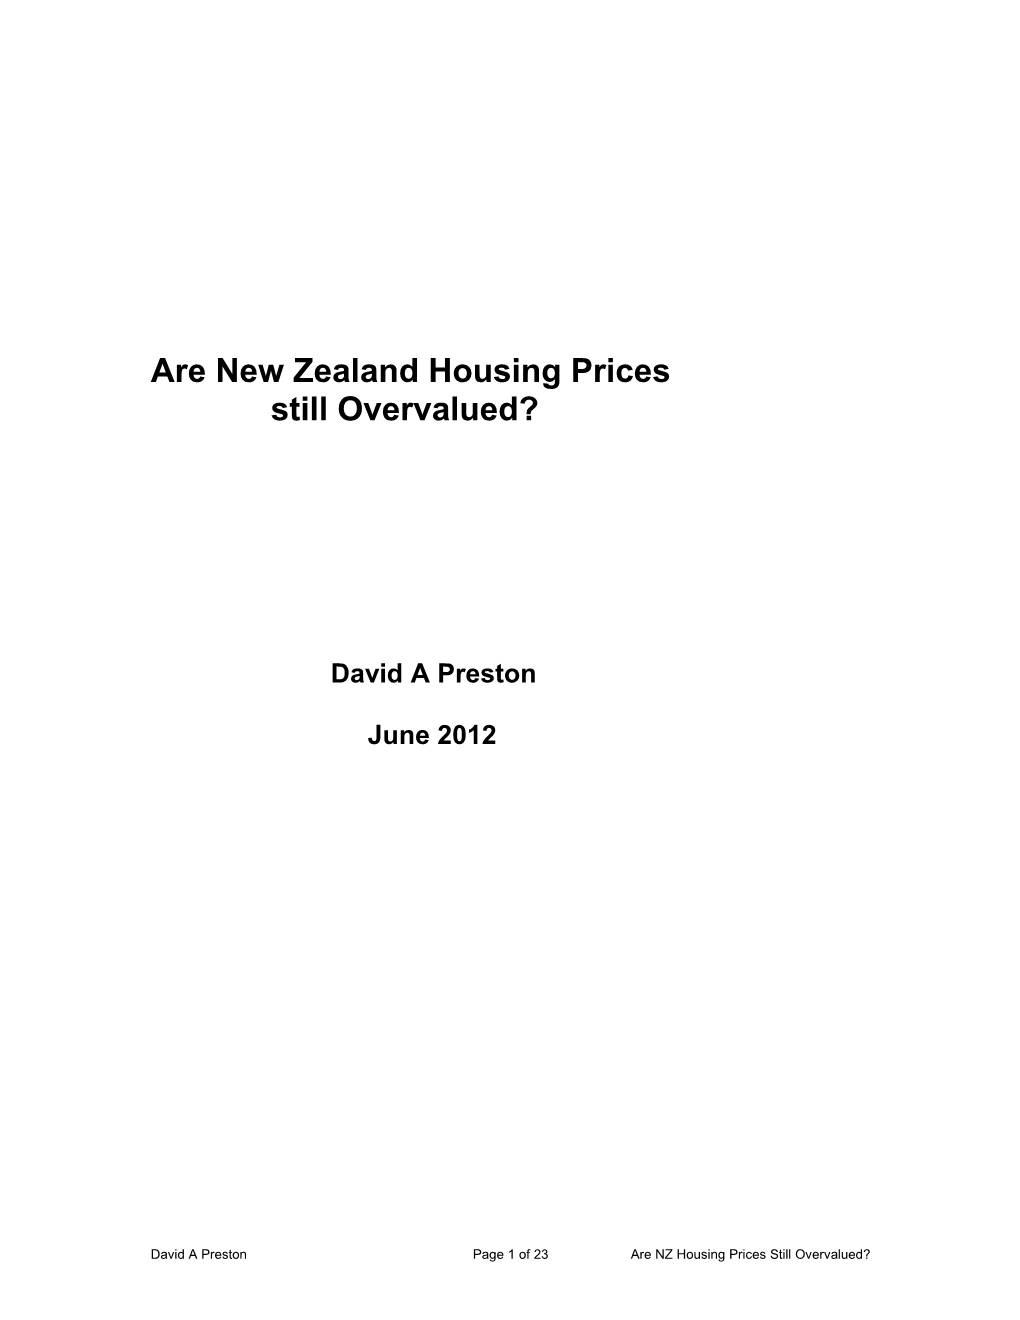 How Overvalued Are NZ Housing Prices